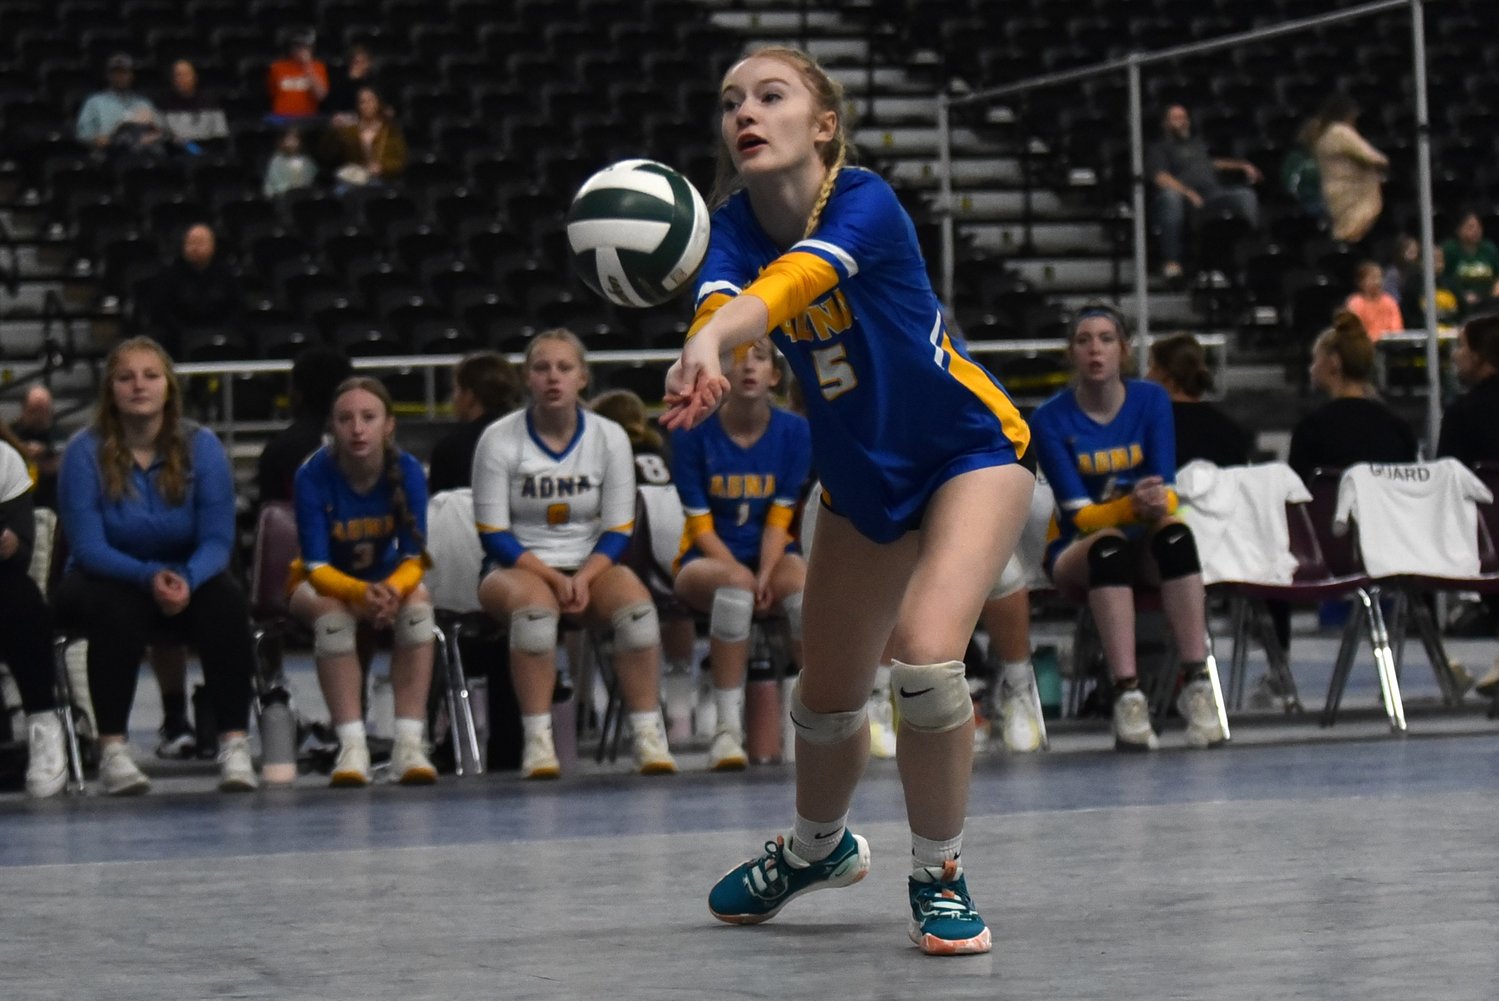 Gaby Guard digs up a serve during Adna's four-set win over Toutle Lake in a loser-out match at the 2B state tournament on Nov. 11 in Yakima.